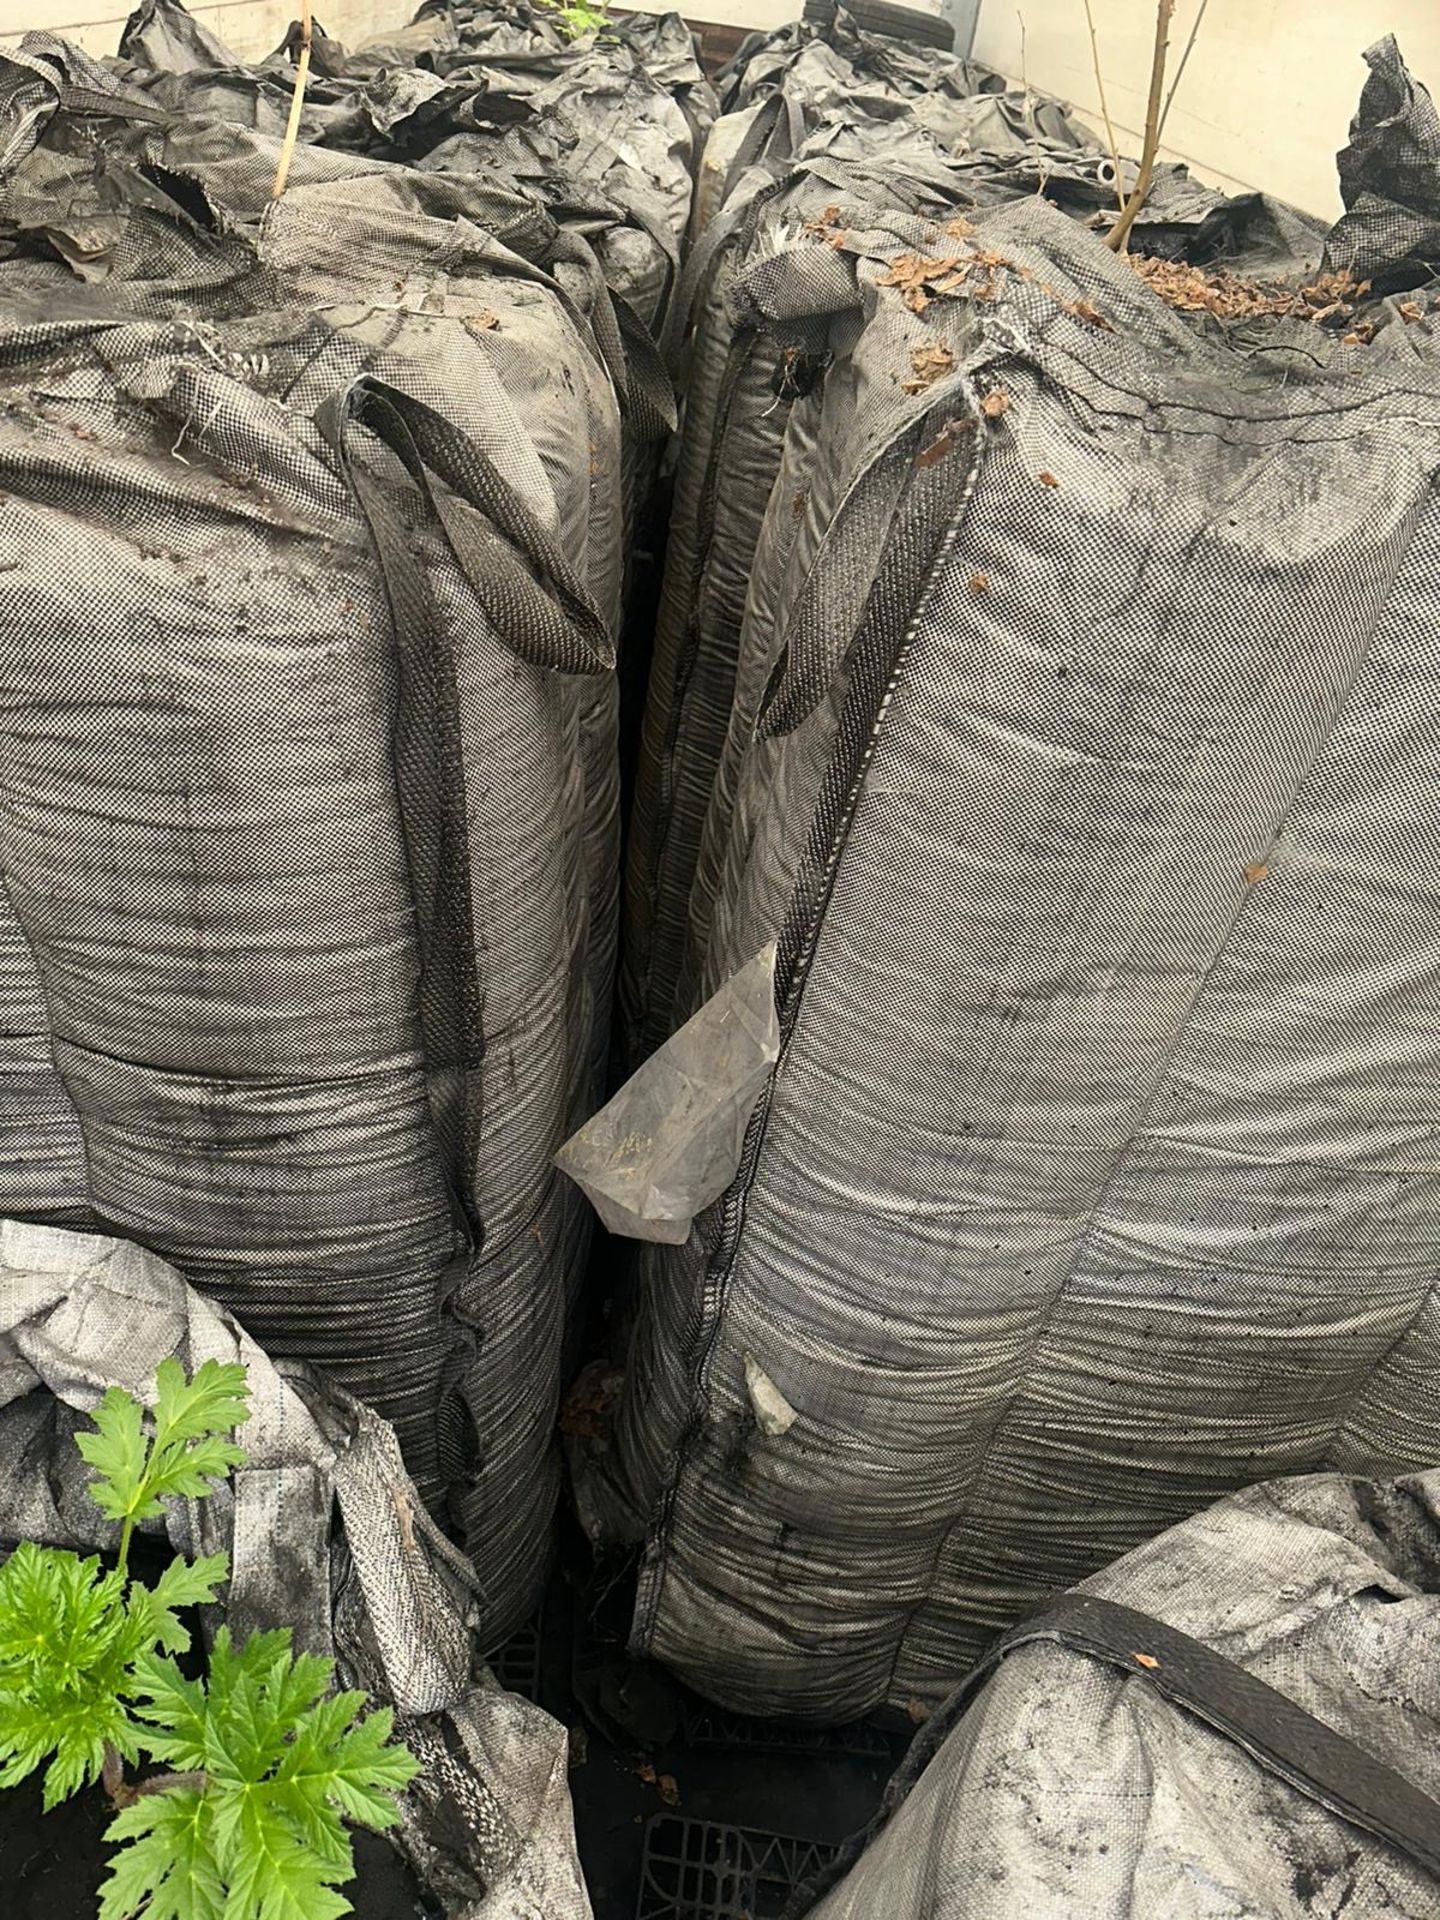 CARBON BLACK RAW MATERIAL BULK BAGS APPROX 14 TONNES - Image 4 of 8